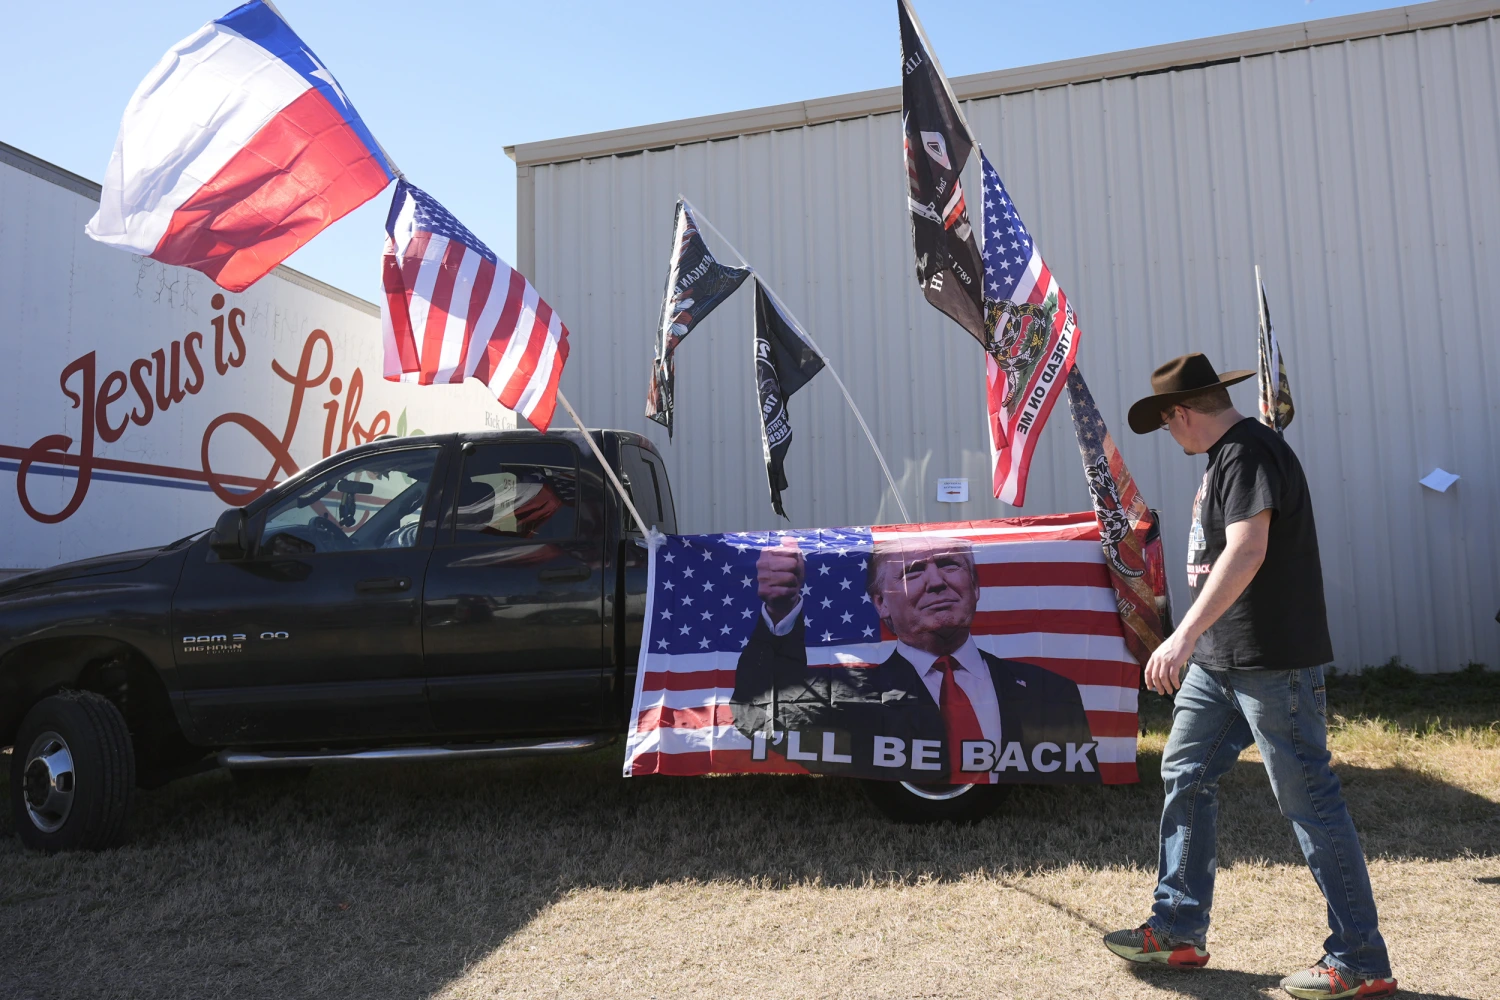 Convoy Of Trump Supporters Calls for Border Reign